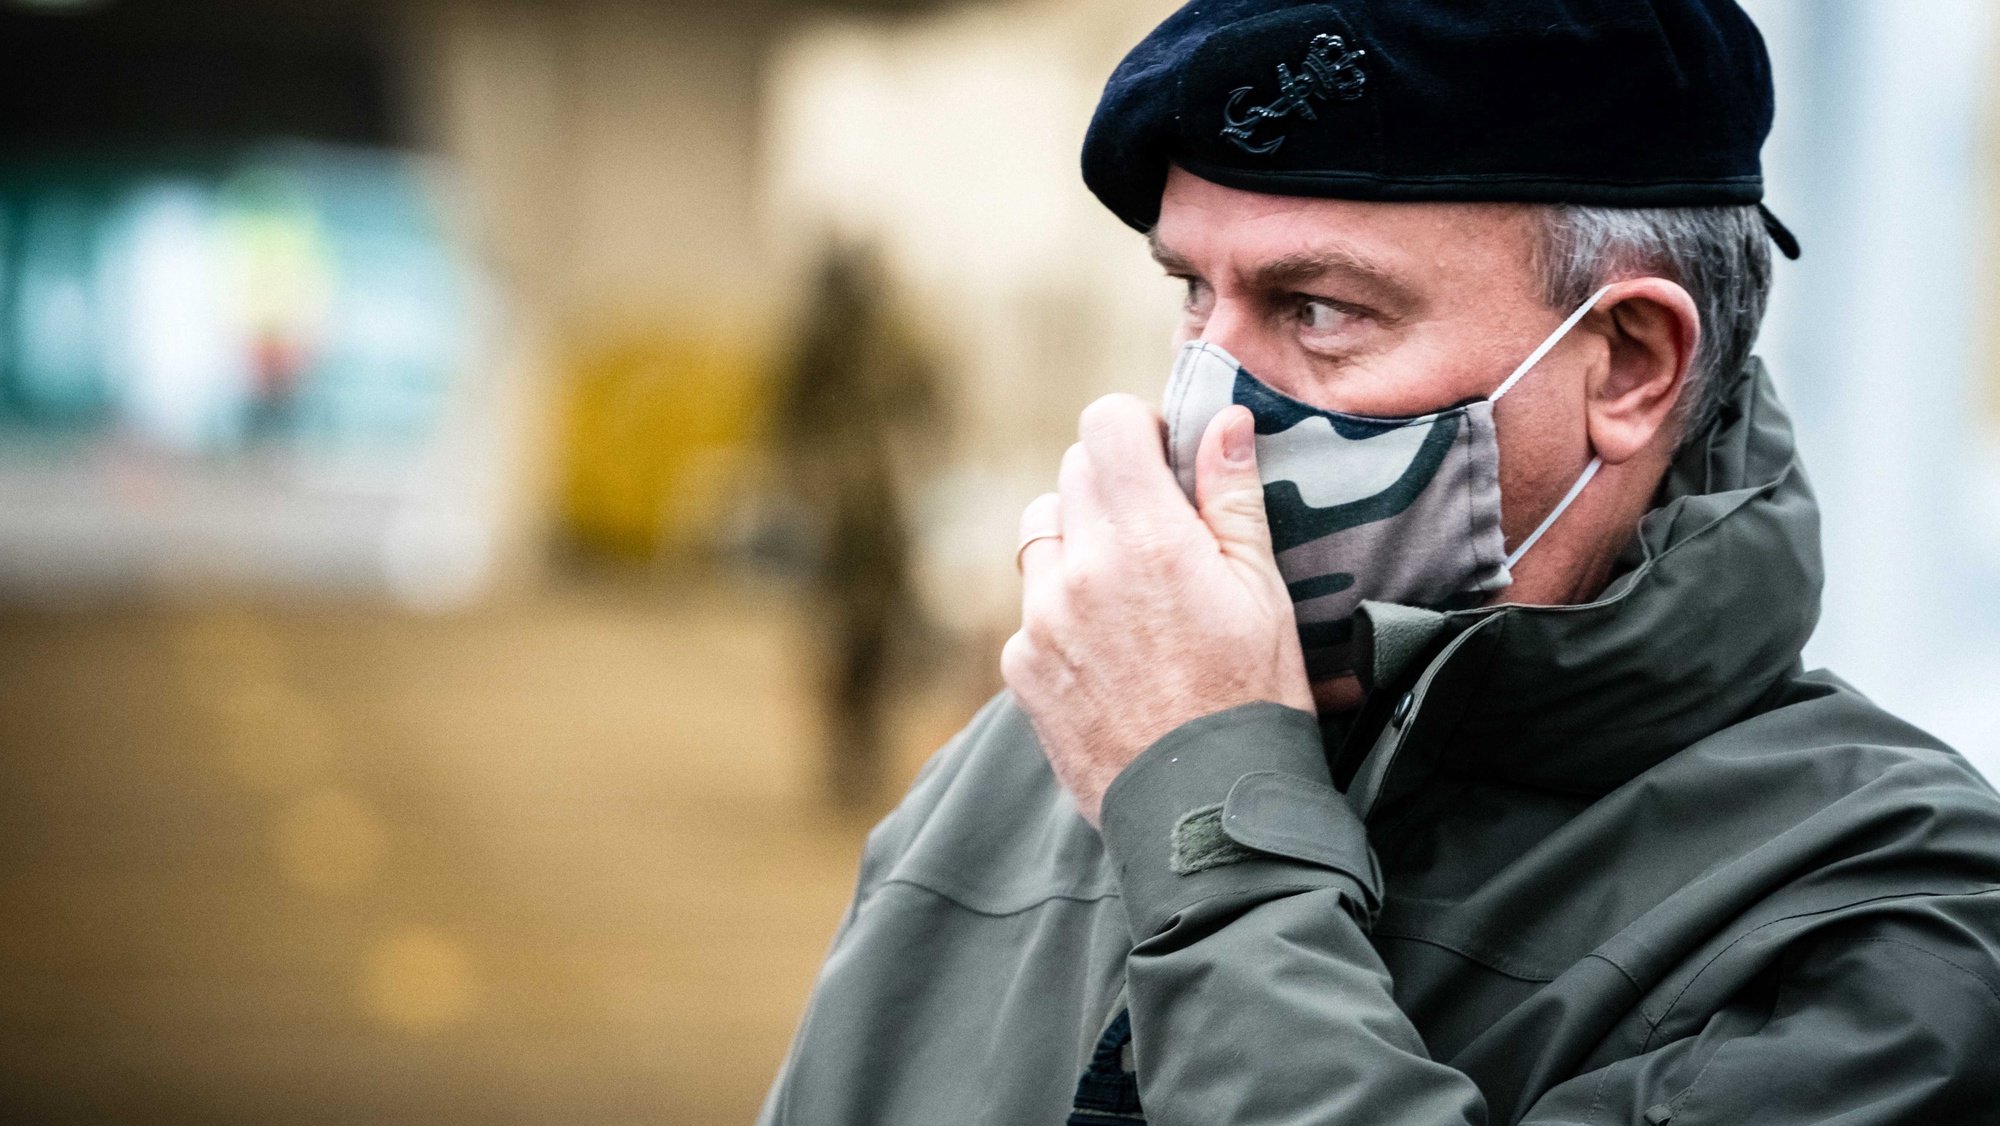 epa08856688 Commander of the Dutch Armed Forces Rob Bauer looks on at the XL test street in Eindhoven, Netherlands, 02 December 2020. Soldiers from the base in Oirschot offered their assistance in carrying out corona tests at the facility.  EPA/ROB ENGELAAR